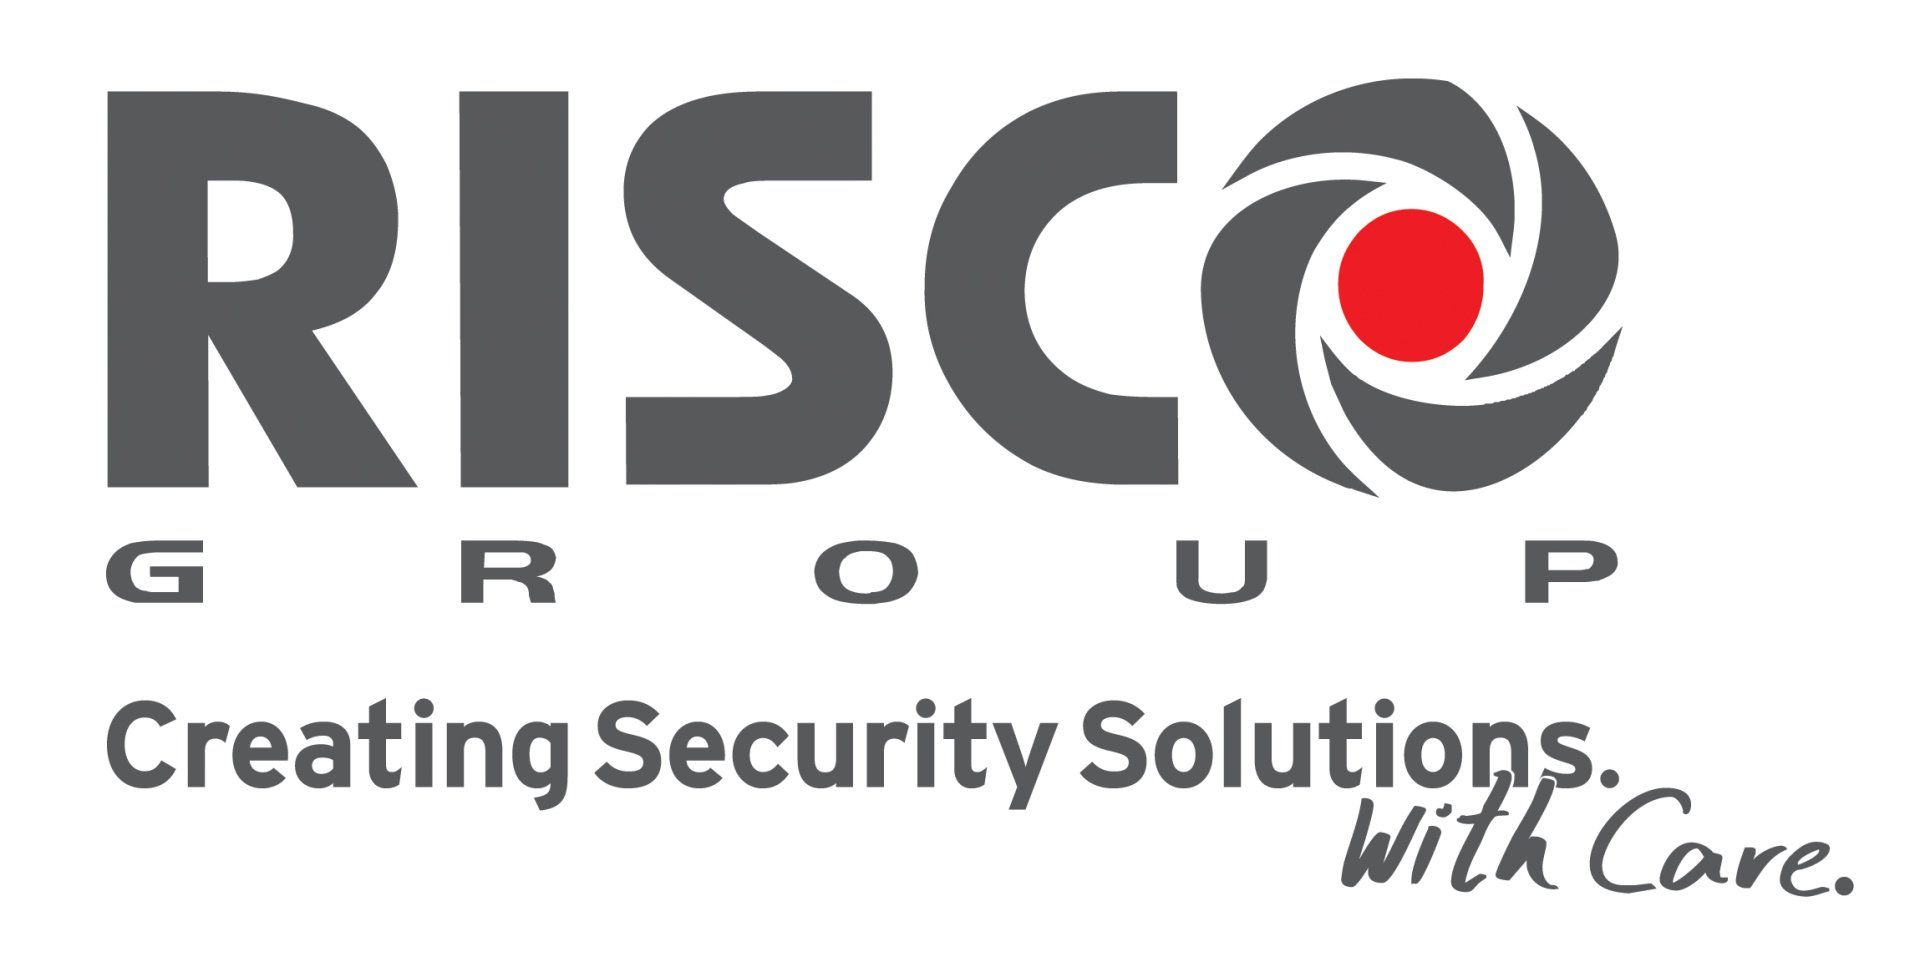 A logo for risco group creating security solutions with care.